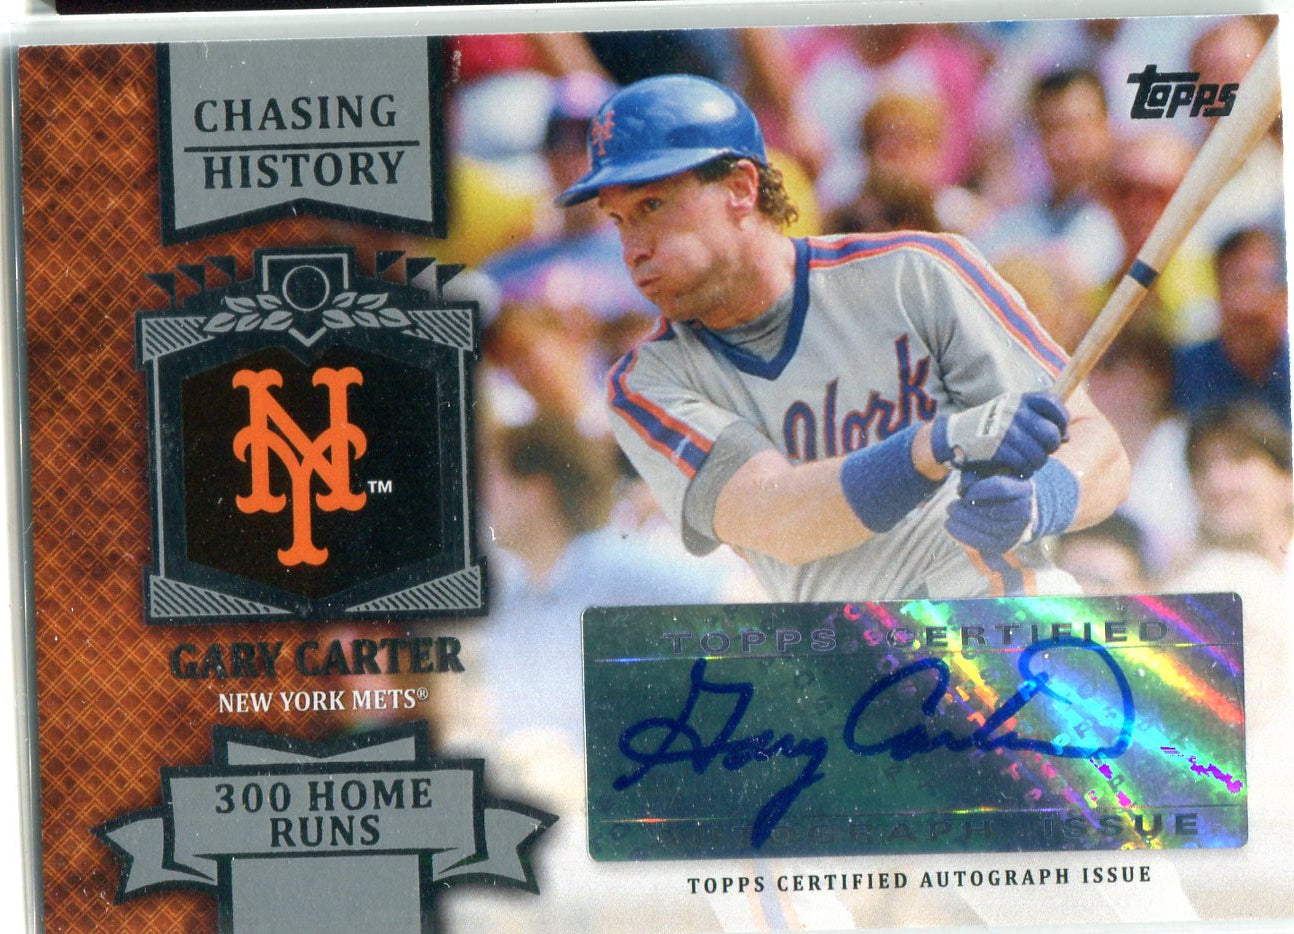 Gary Carter Signed New York Mets Jersey. Baseball Collectibles